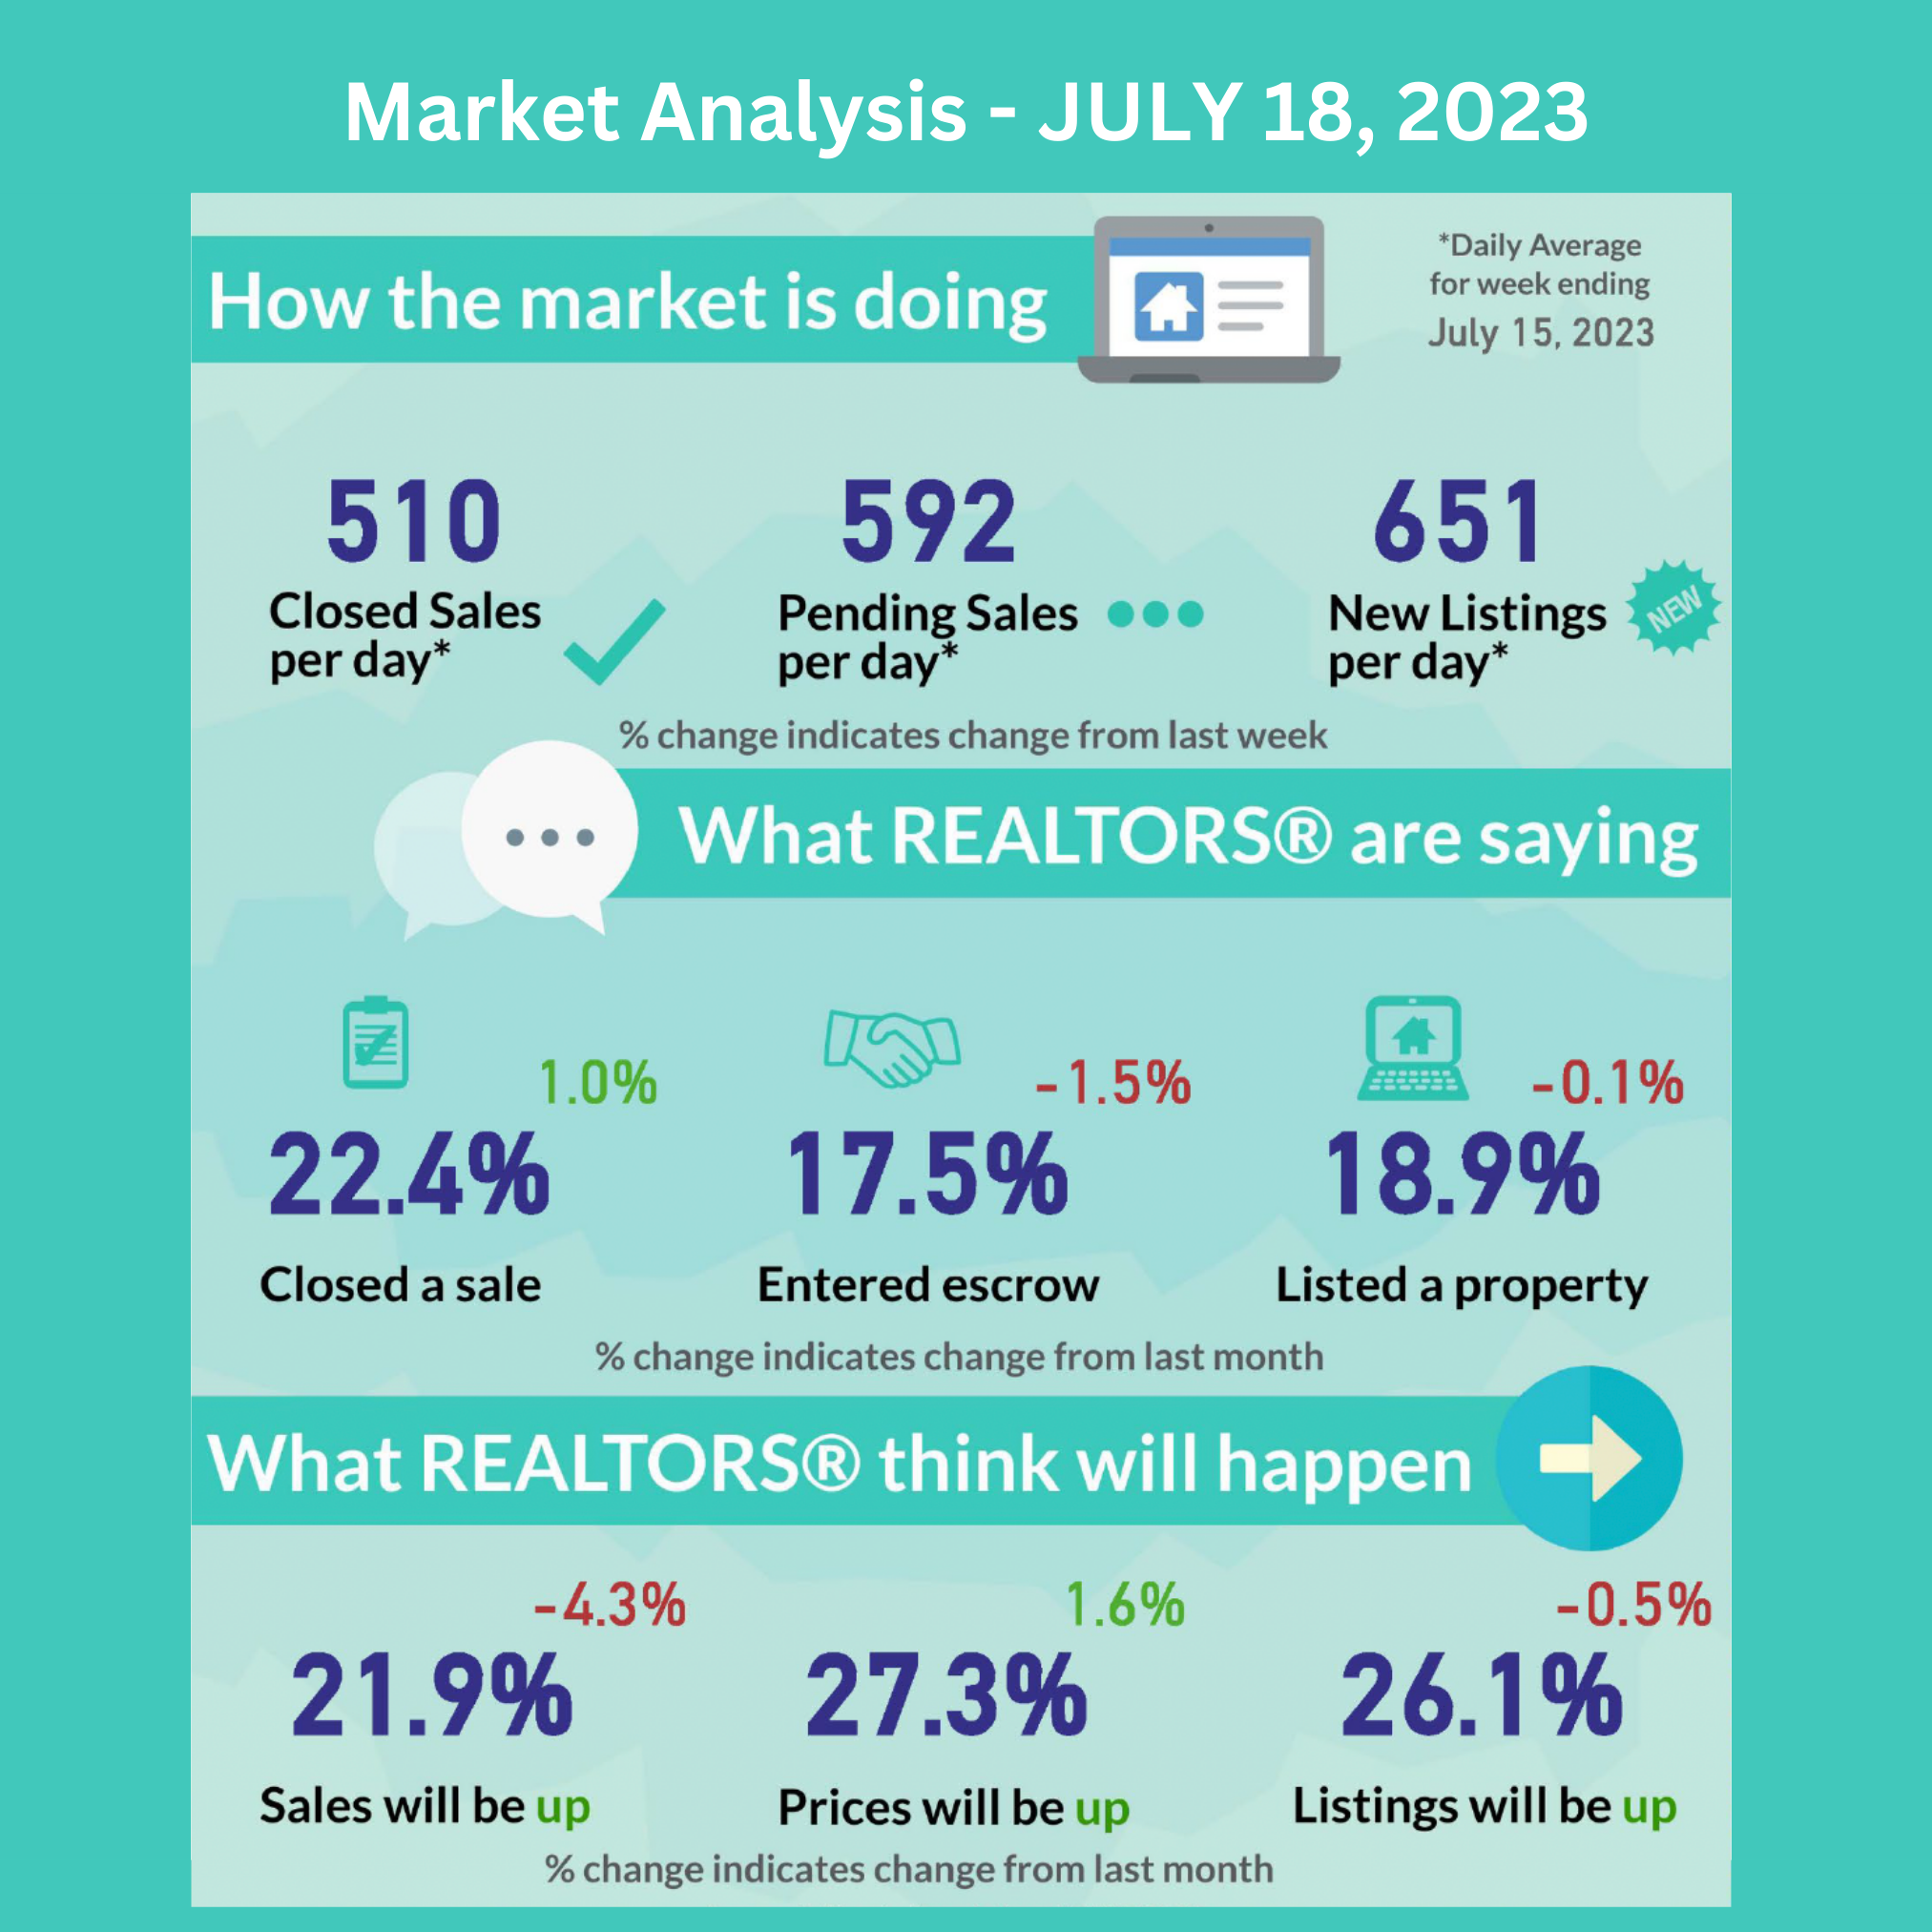 Ventura REALTORS® Remain Upbeat Amidst Housing Challenges, Expecting Growth in Sales Volume and Prices